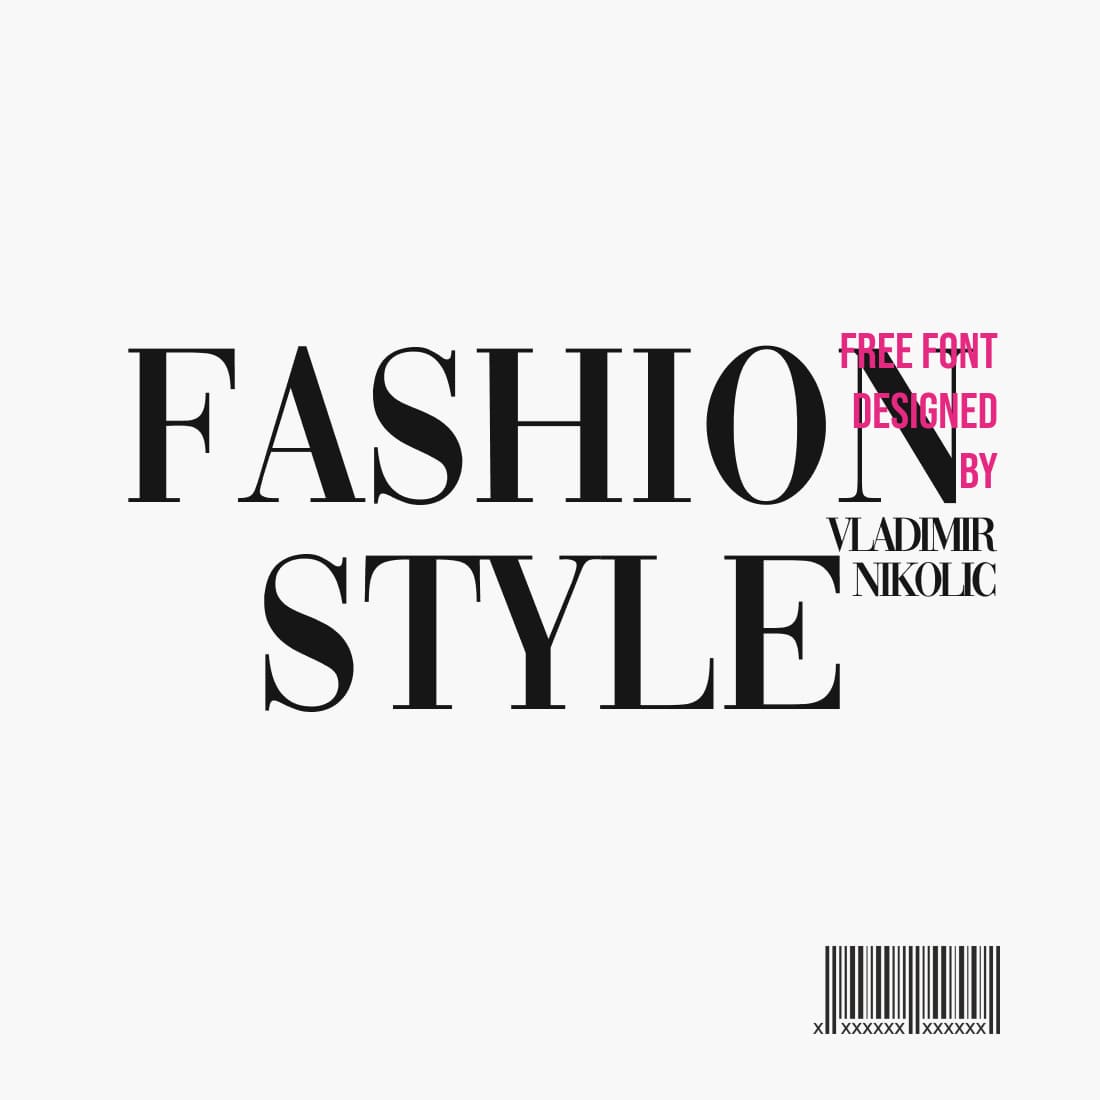 Free Vogue Font Example Cover by MasterBundles.